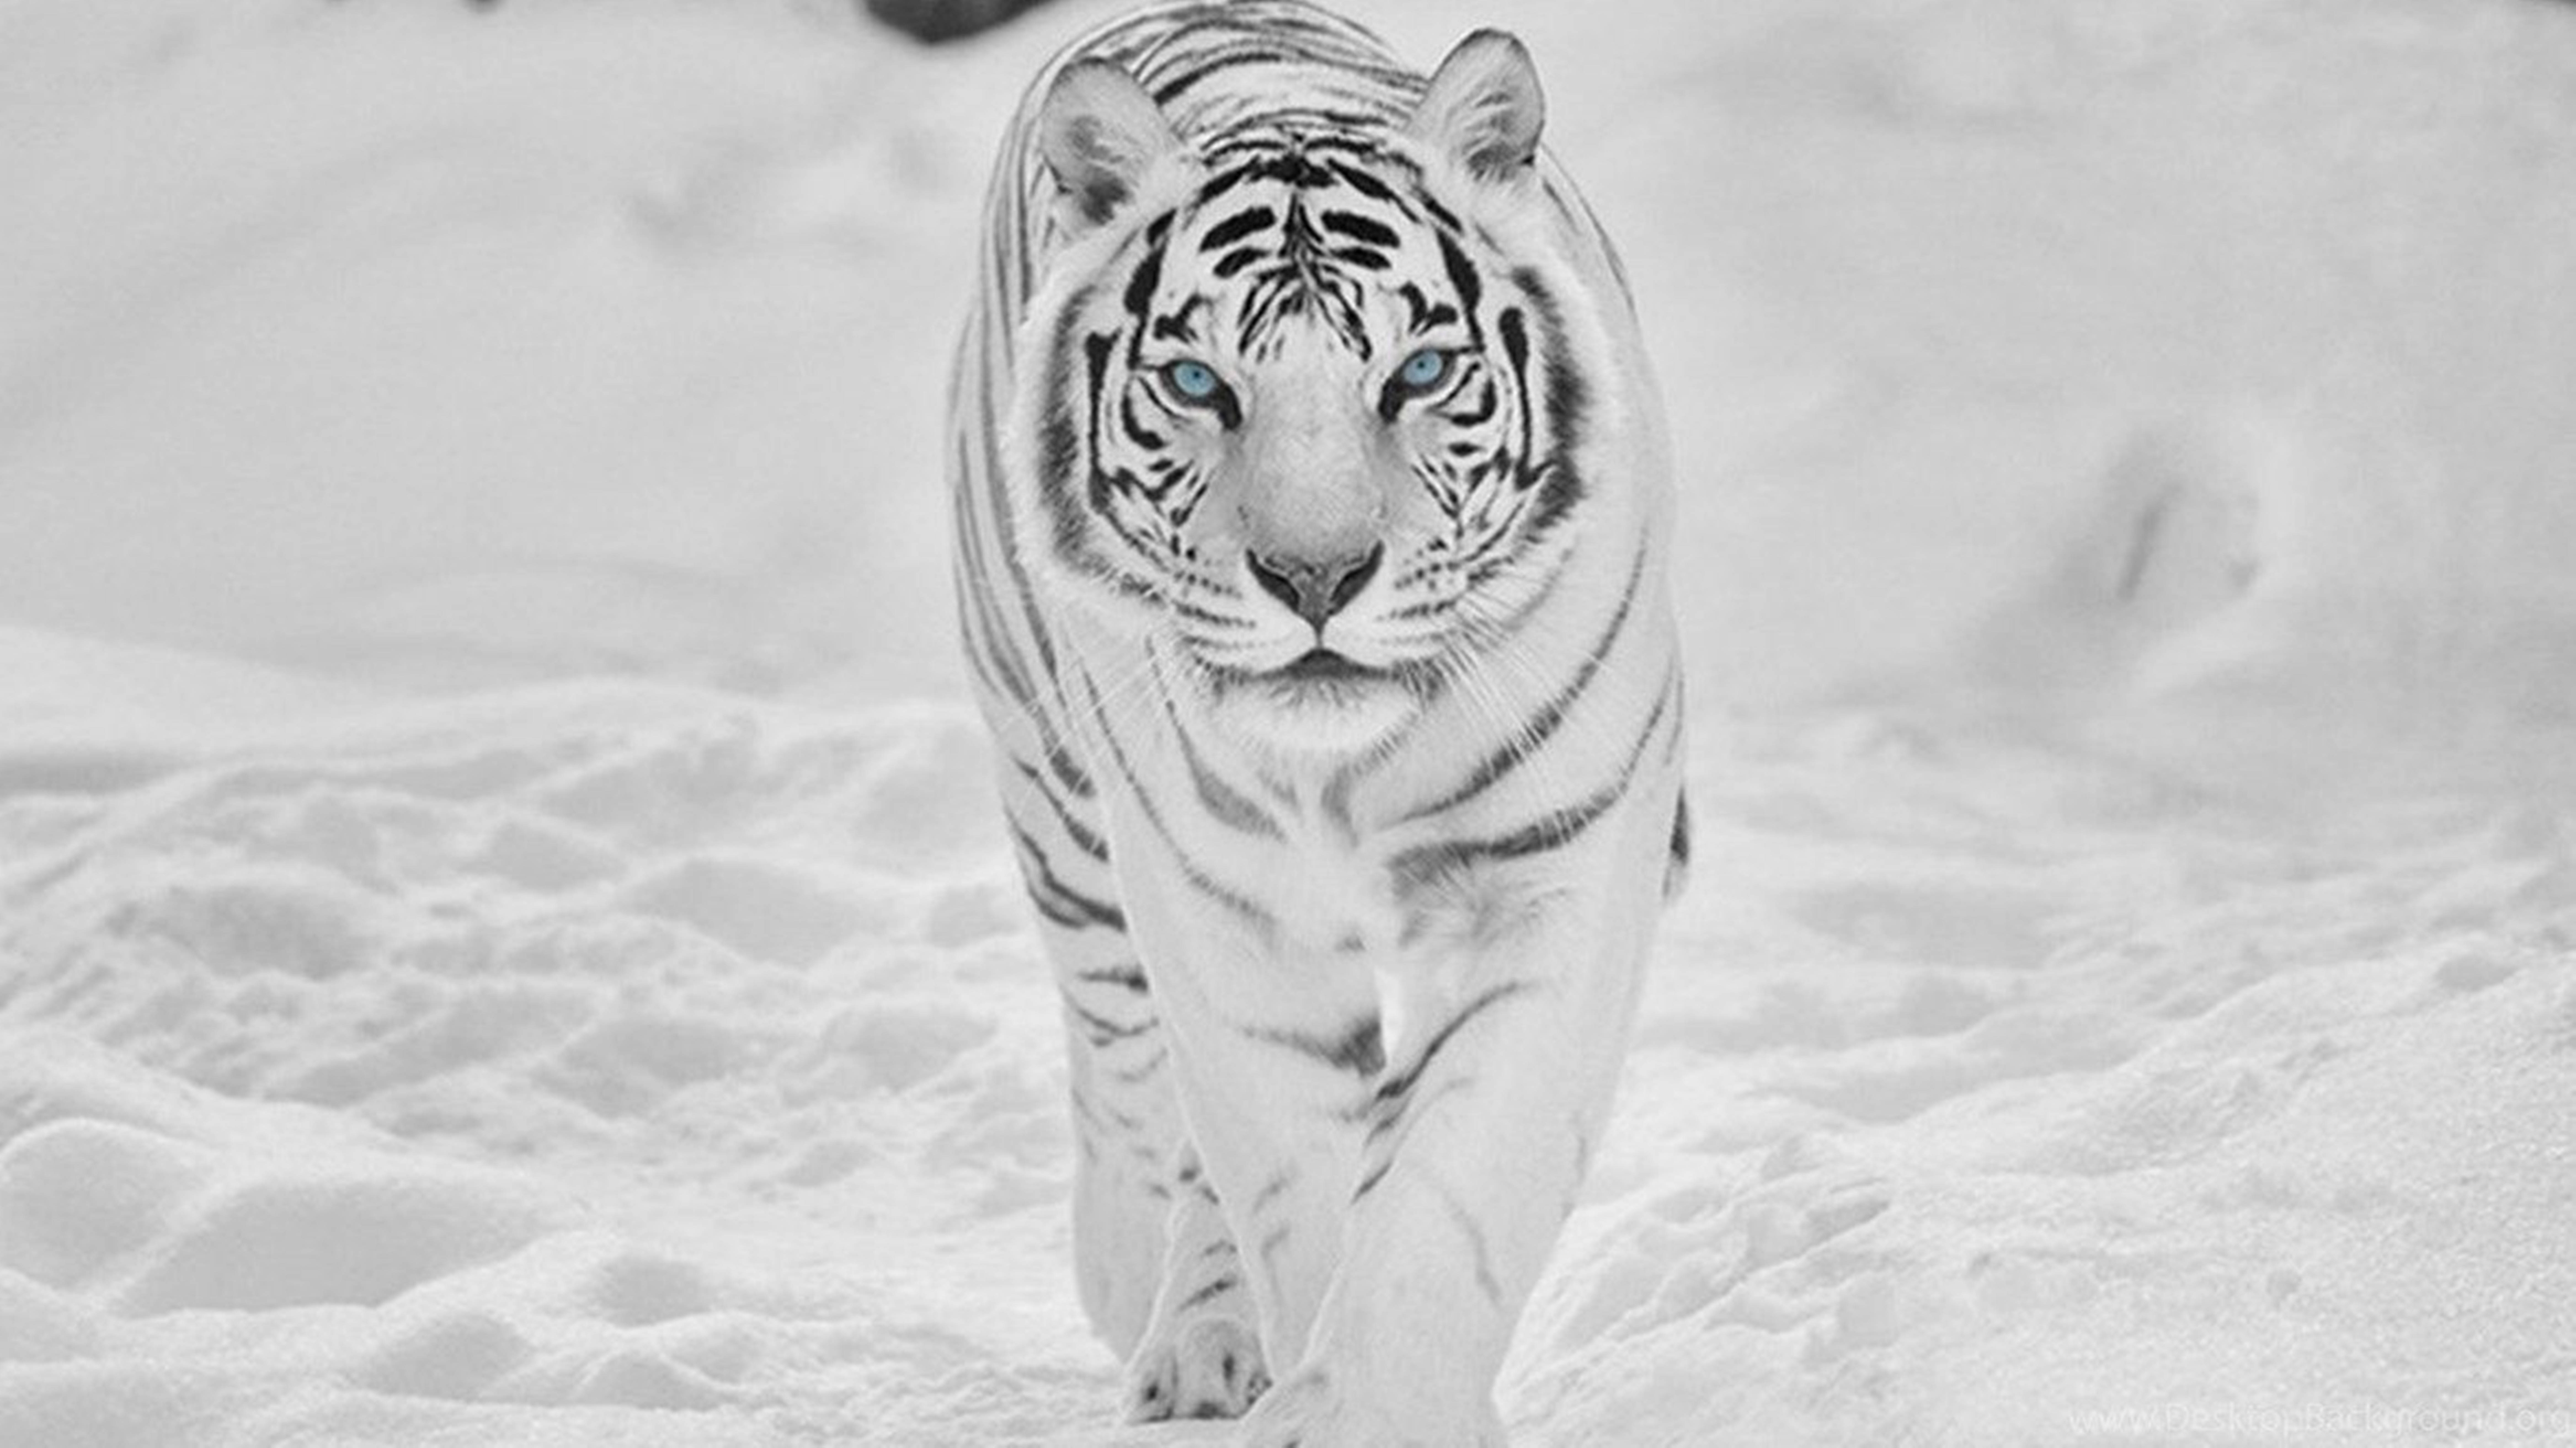 Majestic Tiger Roaming In Snowy Wilderness - 8k Uhd Picture Wallpaper